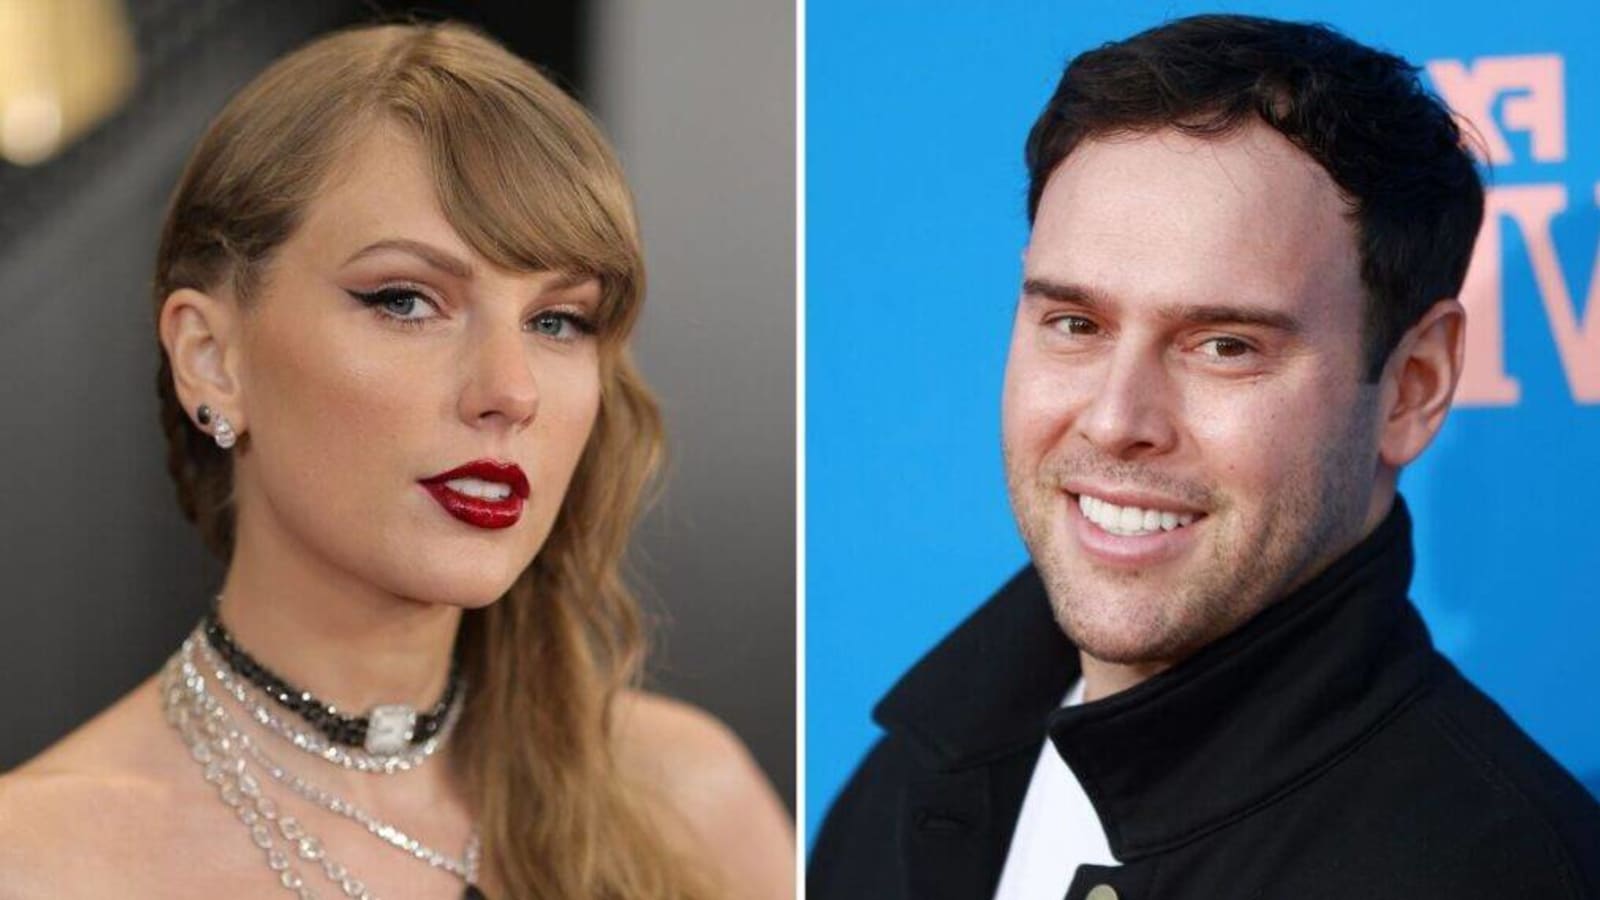 ‘Taylor Swift vs. Scooter Braun’ Feud to Be Subject of Discovery+ Docuseries